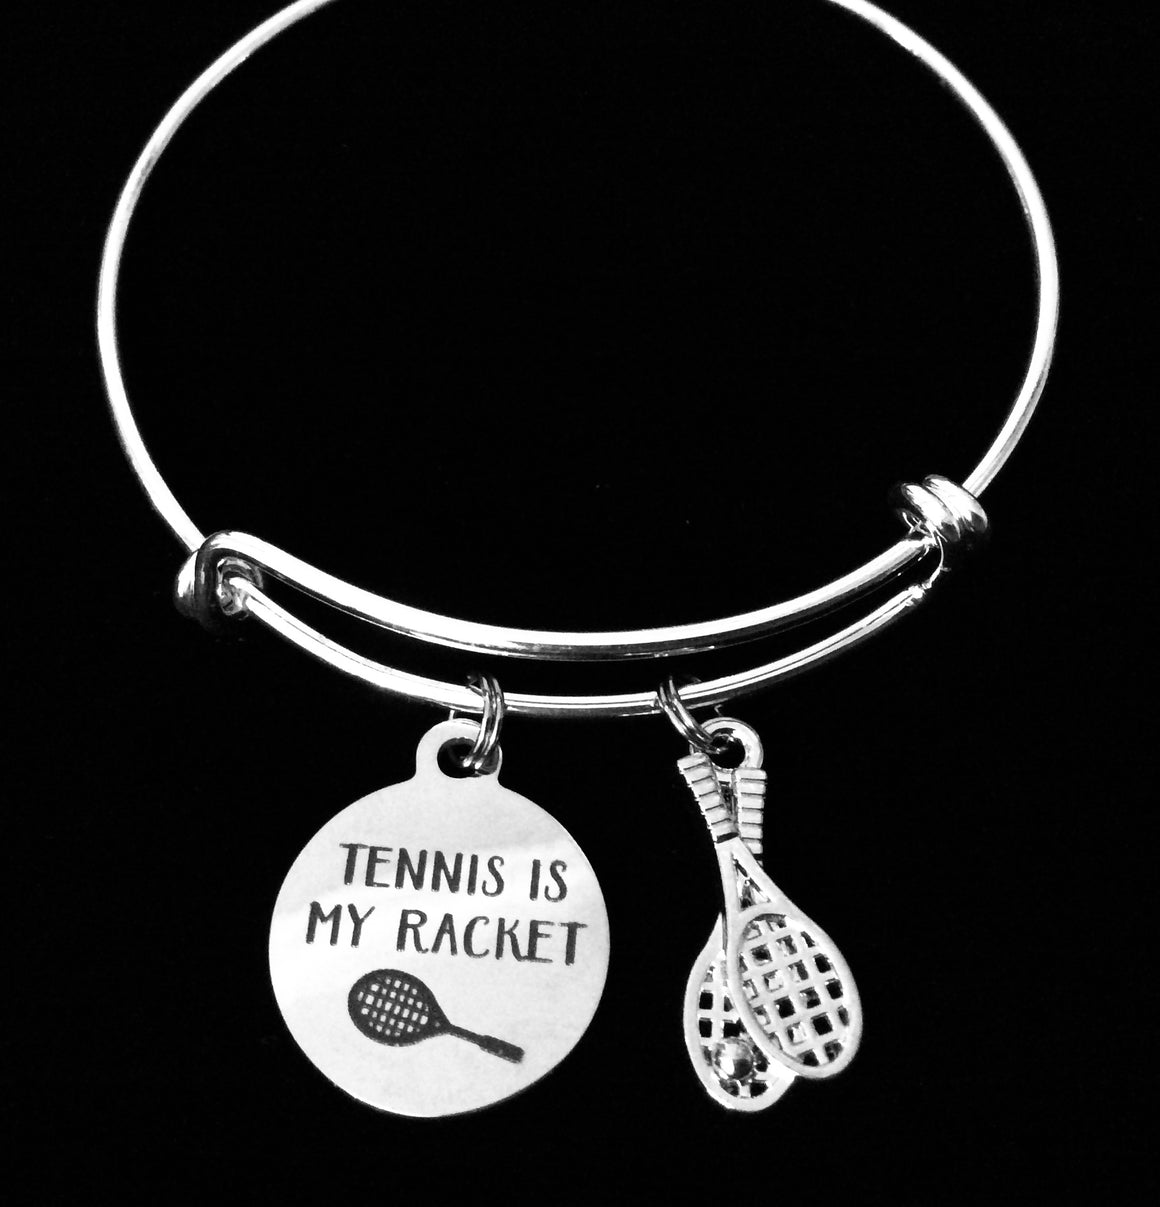 Silver Tennis is My Racket Silver Expandable Charm Bracelet Adjustable Wire Bangle Bracelet Coach Sports Gift